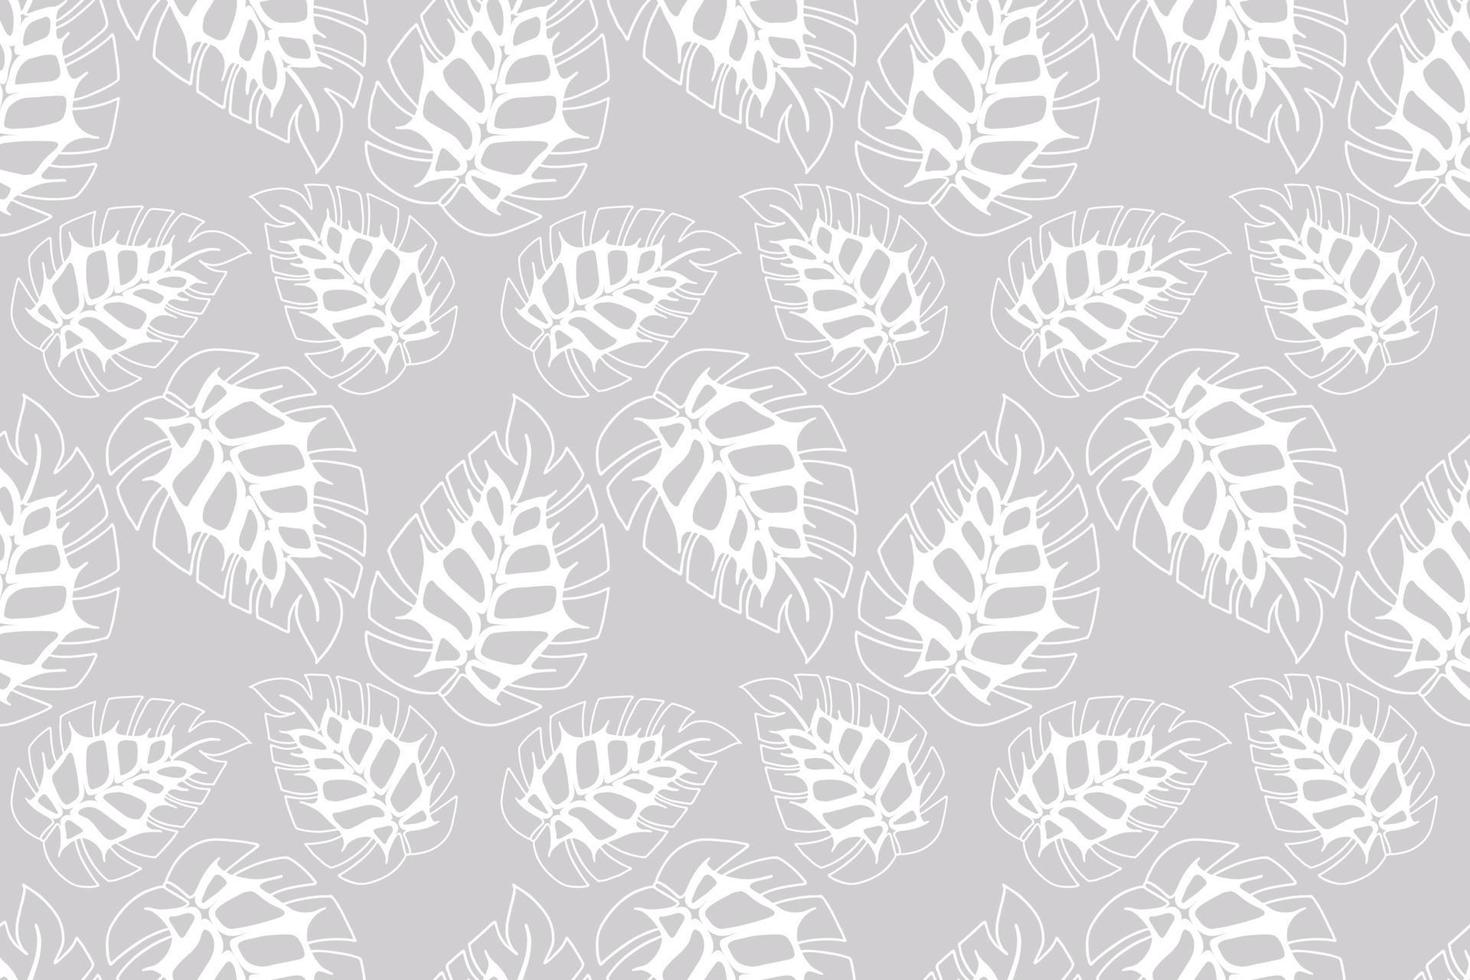 Monstera doodling leaves seamless pattern, pastel colors, white. For textiles backgrounds packaging wrapping furniture upholstery. Vector